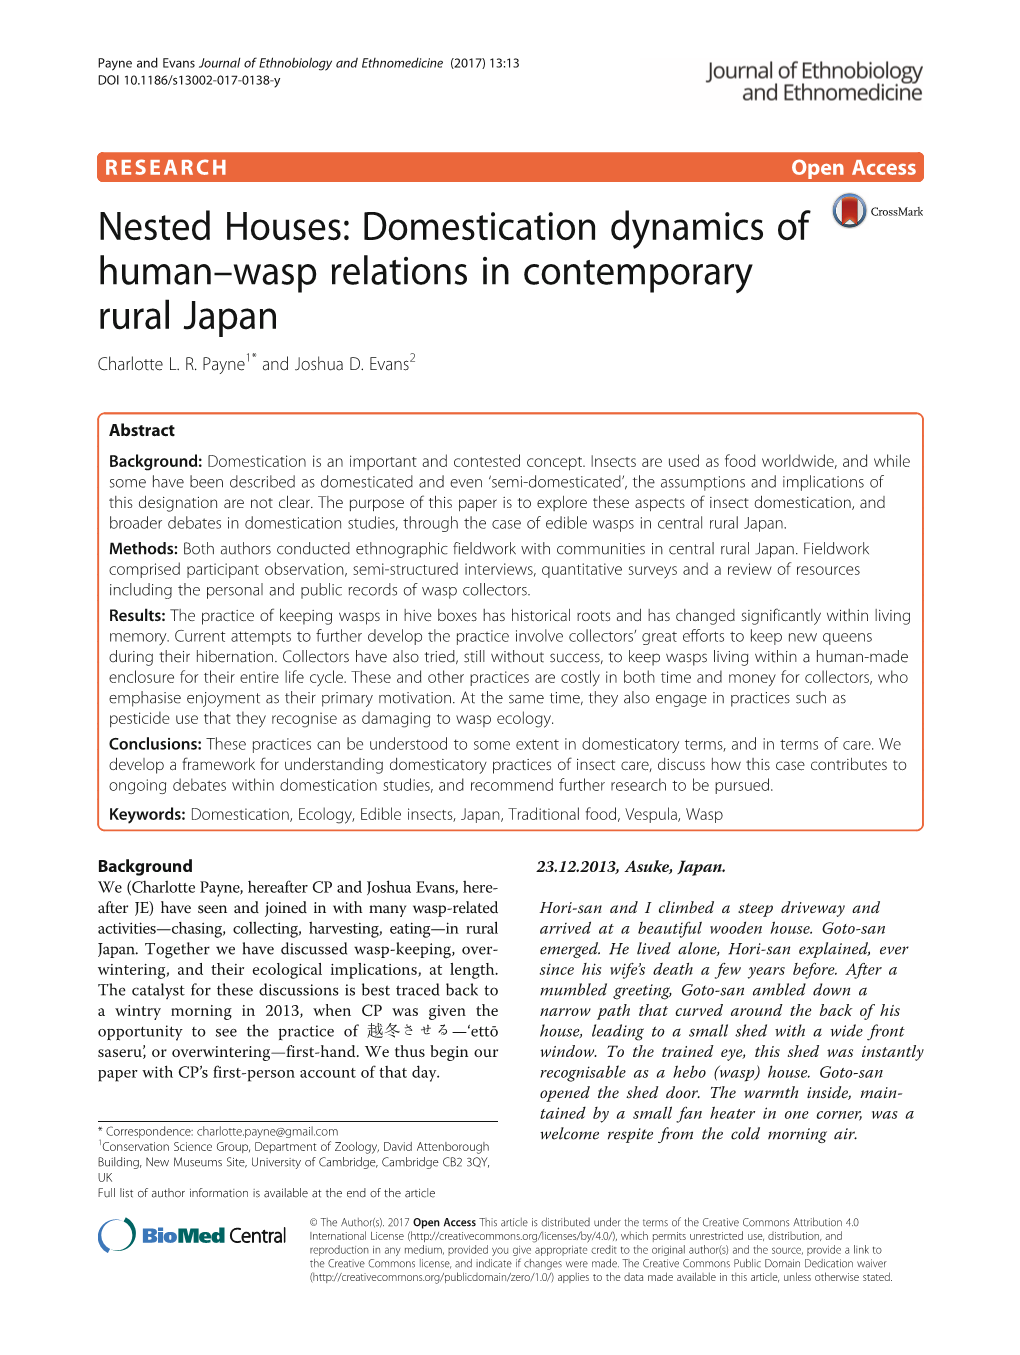 Nested Houses: Domestication Dynamics of Human–Wasp Relations in Contemporary Rural Japan Charlotte L